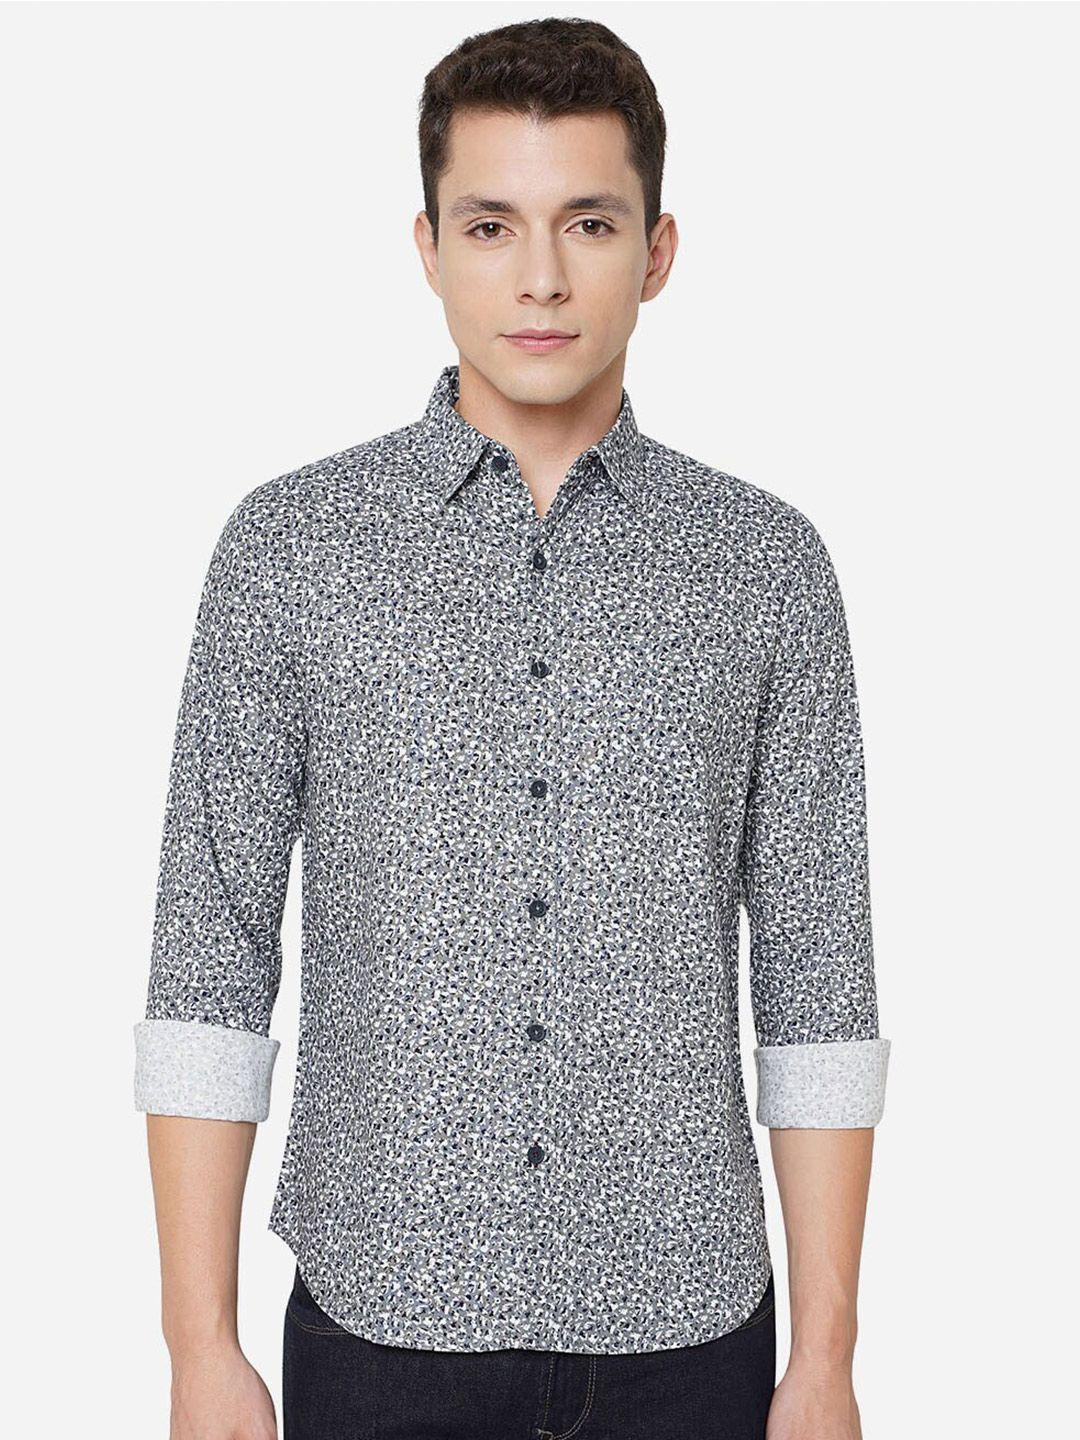 greenfibre-men-classic-slim-fit-floral-printed-pure-cotton-casual-shirt